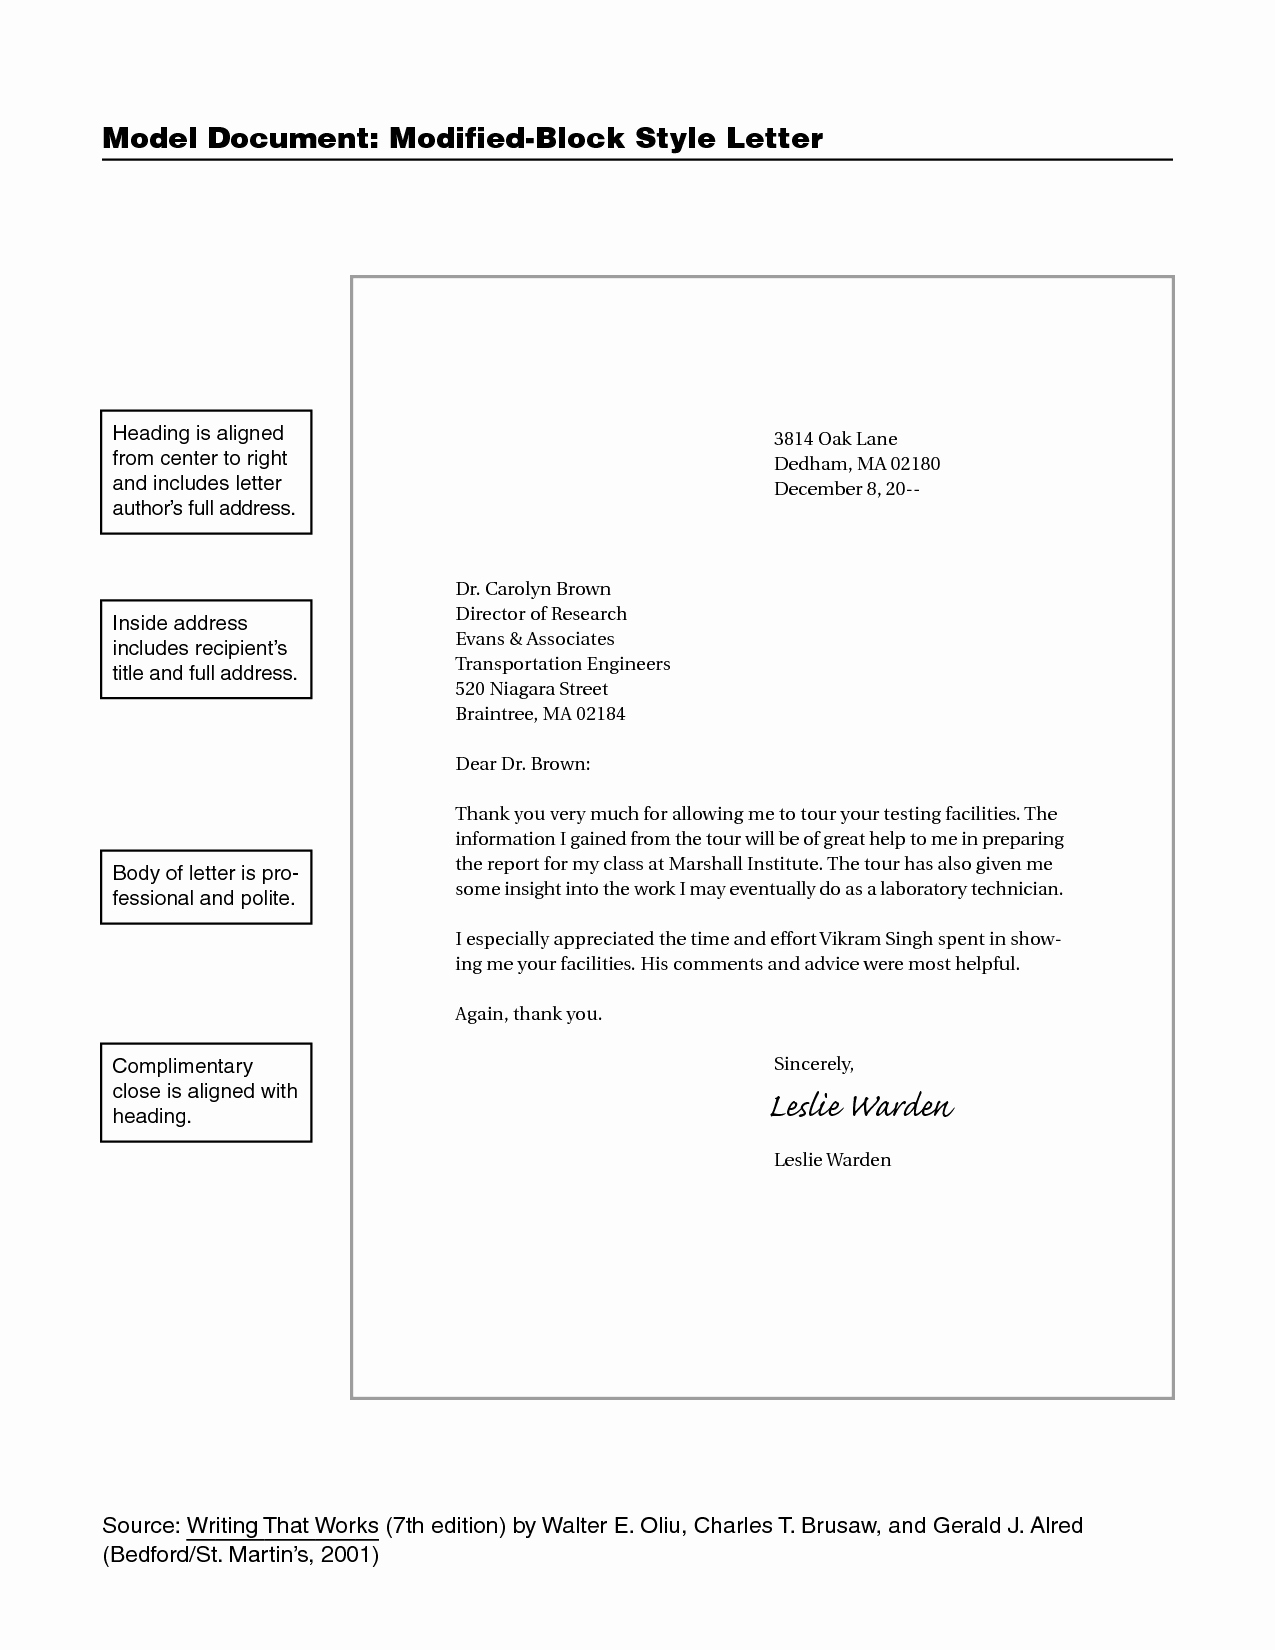 Full Block Letter format Beautiful Full Blocked Style Application Letter with Business Plus